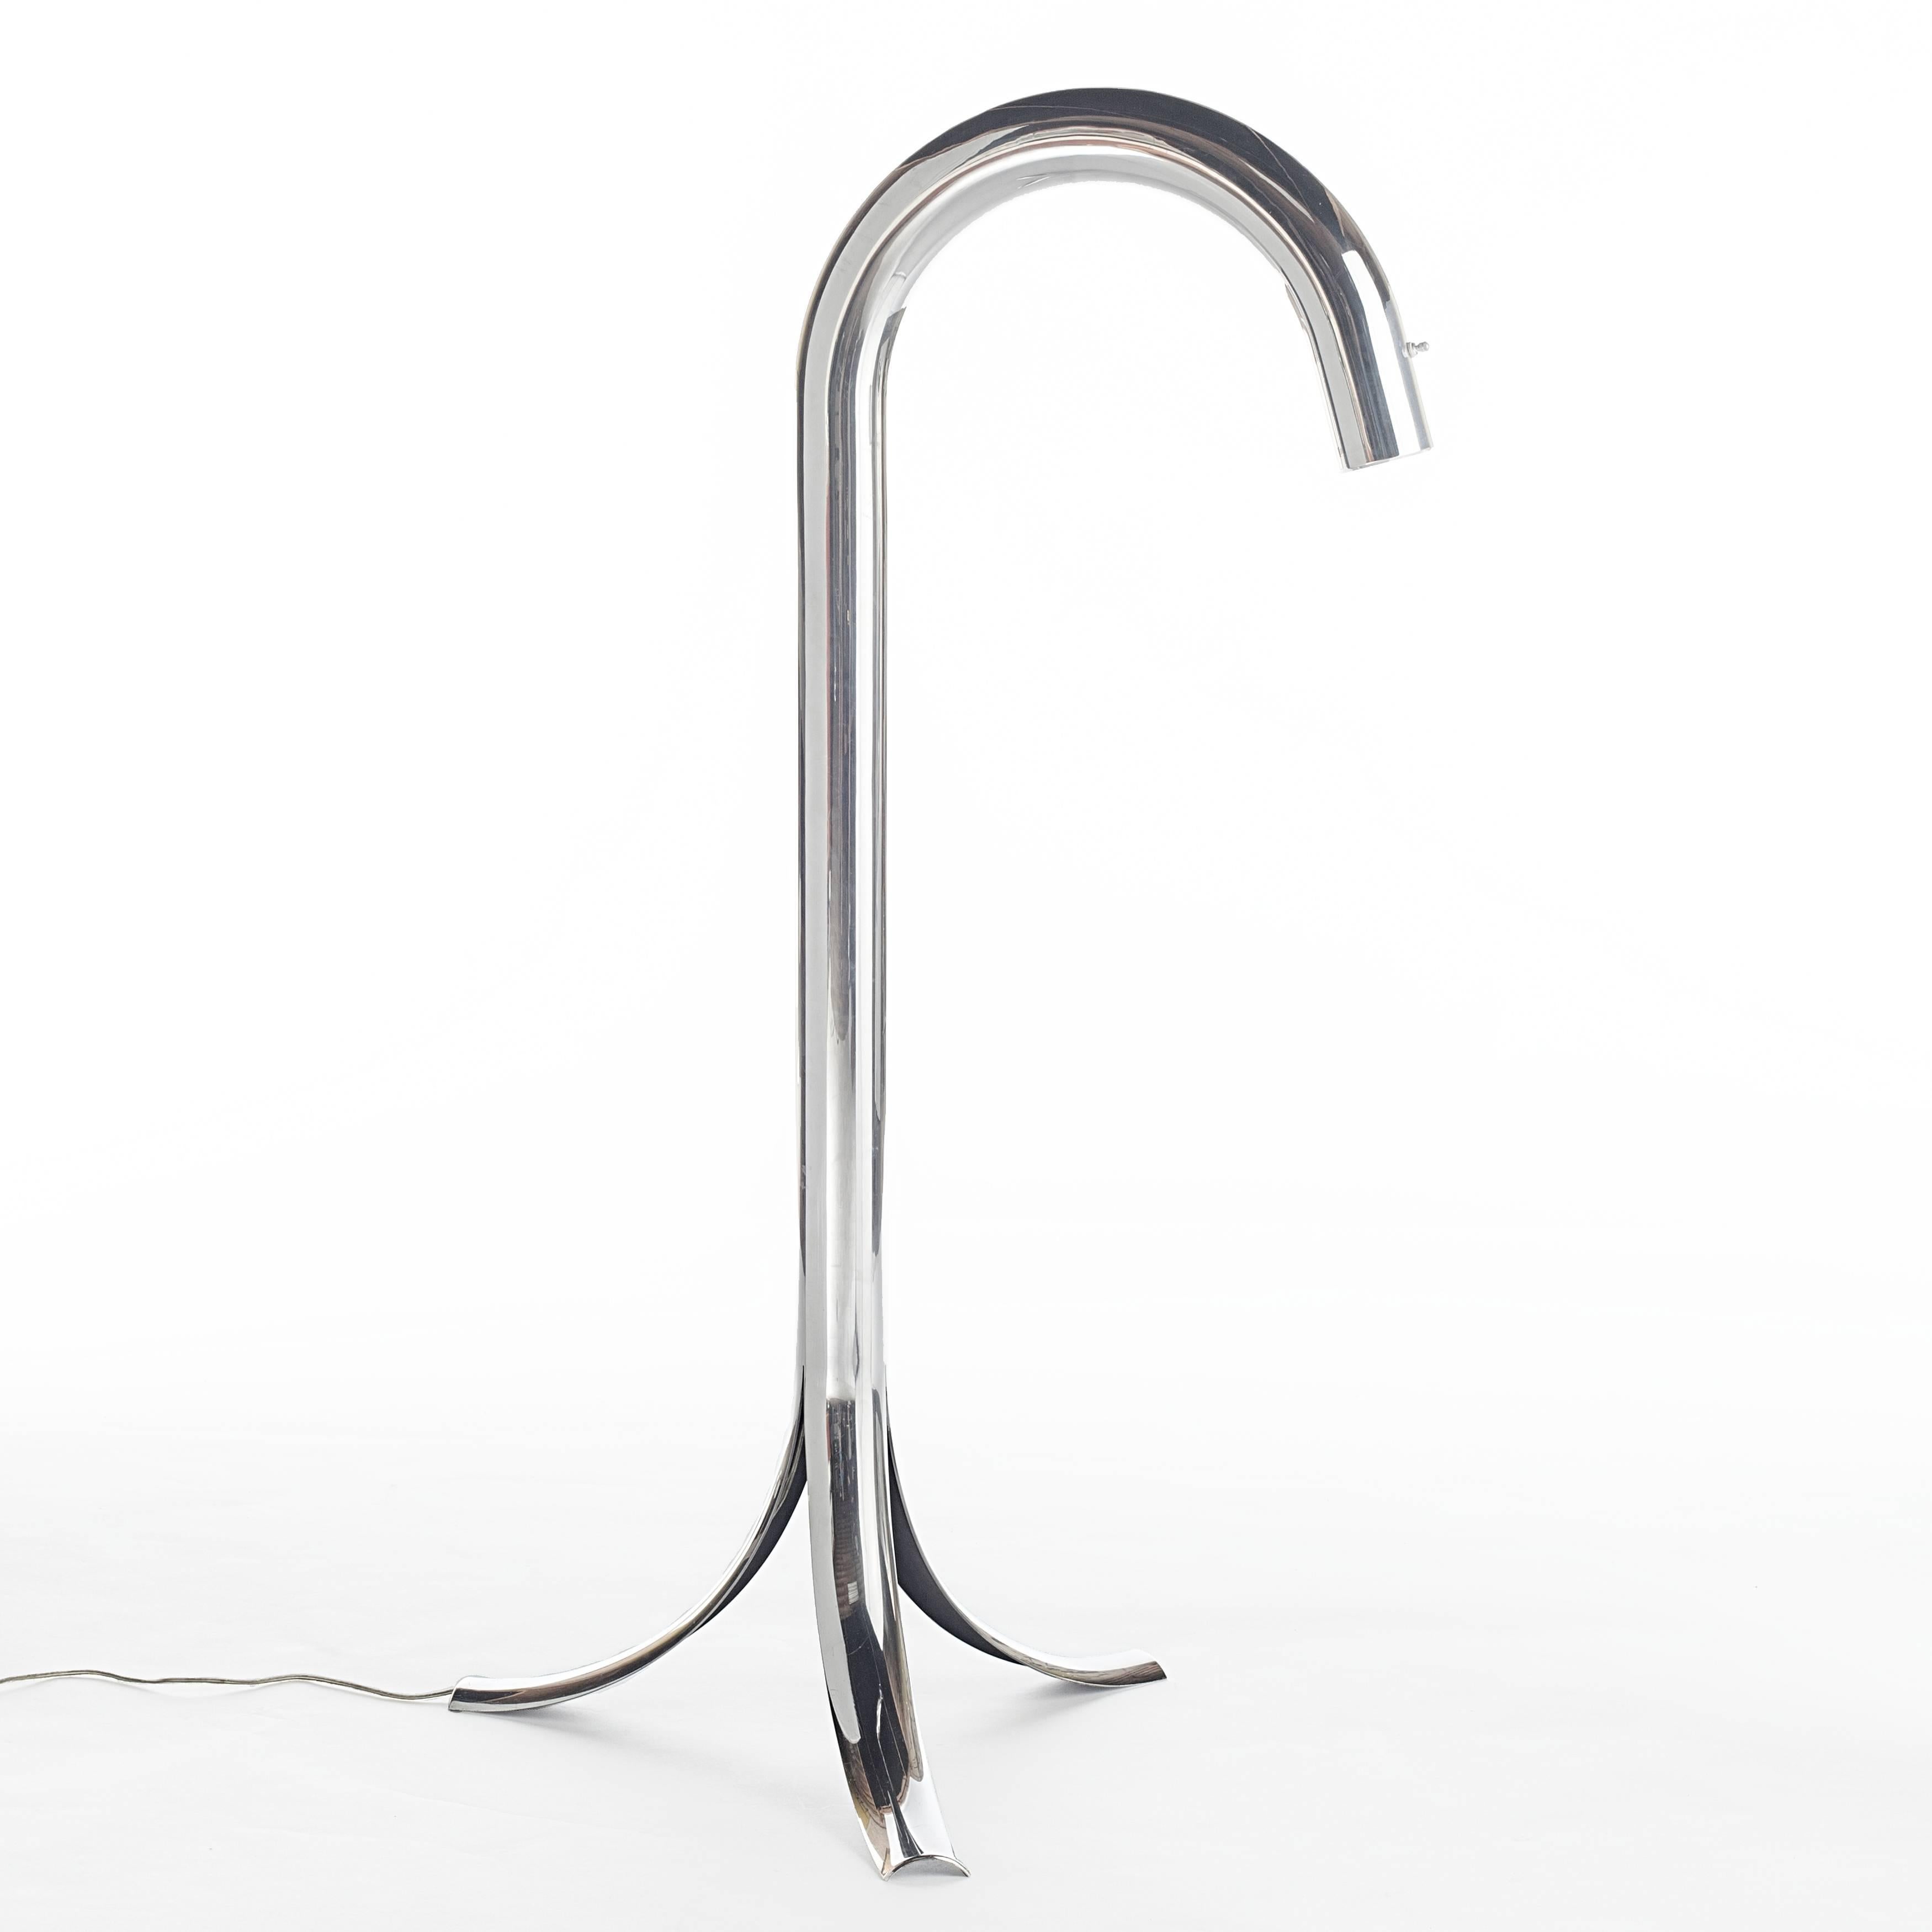 This sculptural aluminum floor lamp is in the permanent collection at MOMA and features three splayed legs merging into a gracefully arched tube. A single switch is located on the neck of the lamp, which takes a single standard-base bulb. 

